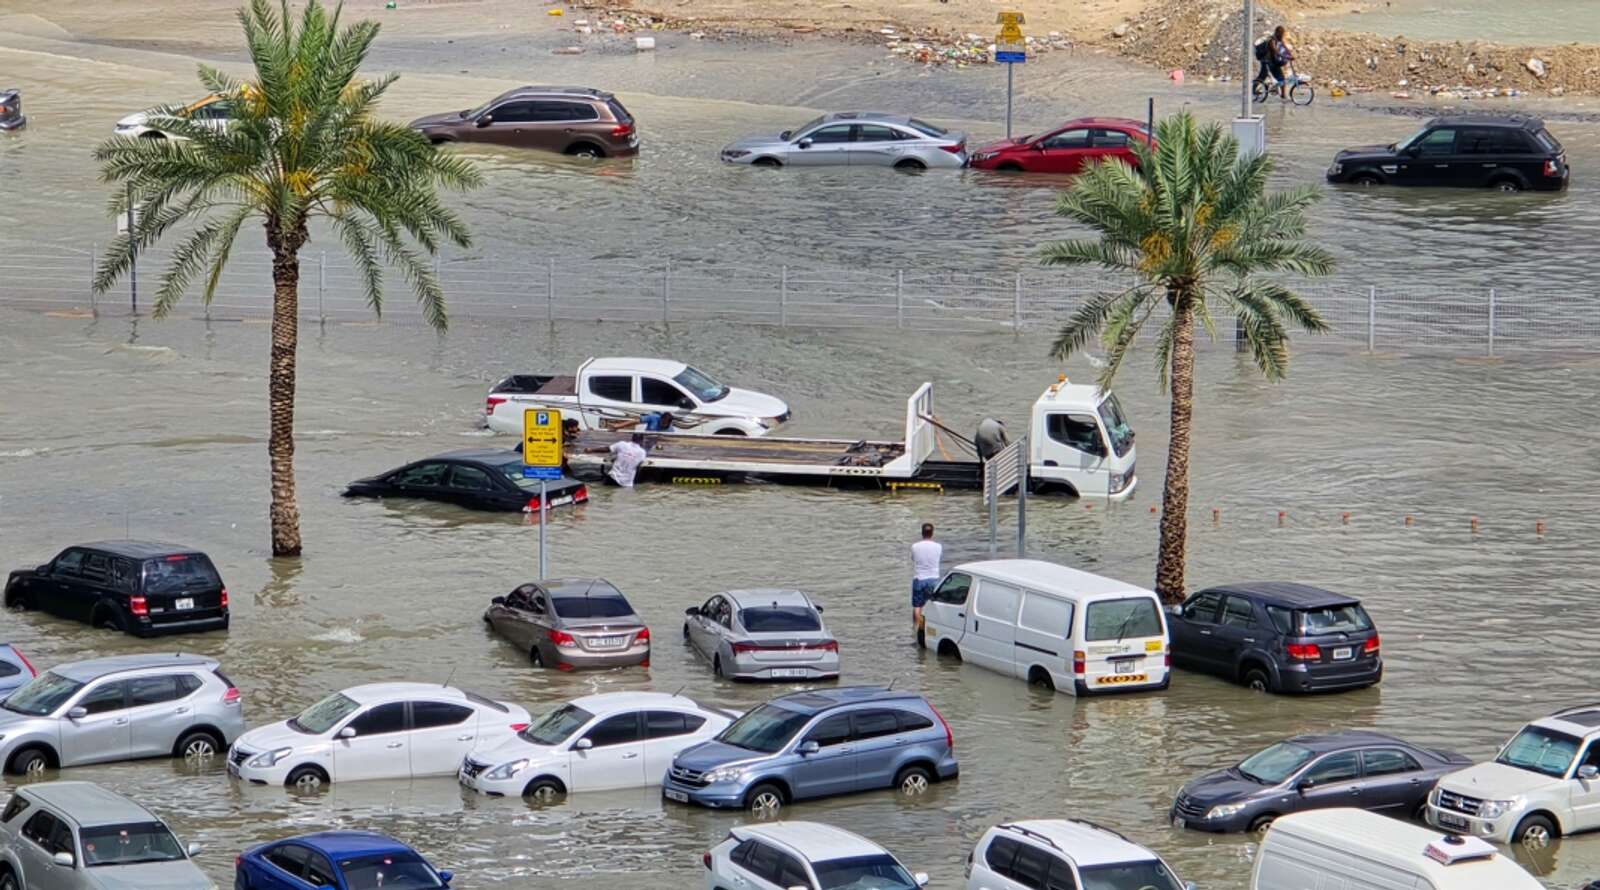 uae gets 6 billion cubic metres of rains: never saw anything like this before, says weatherman